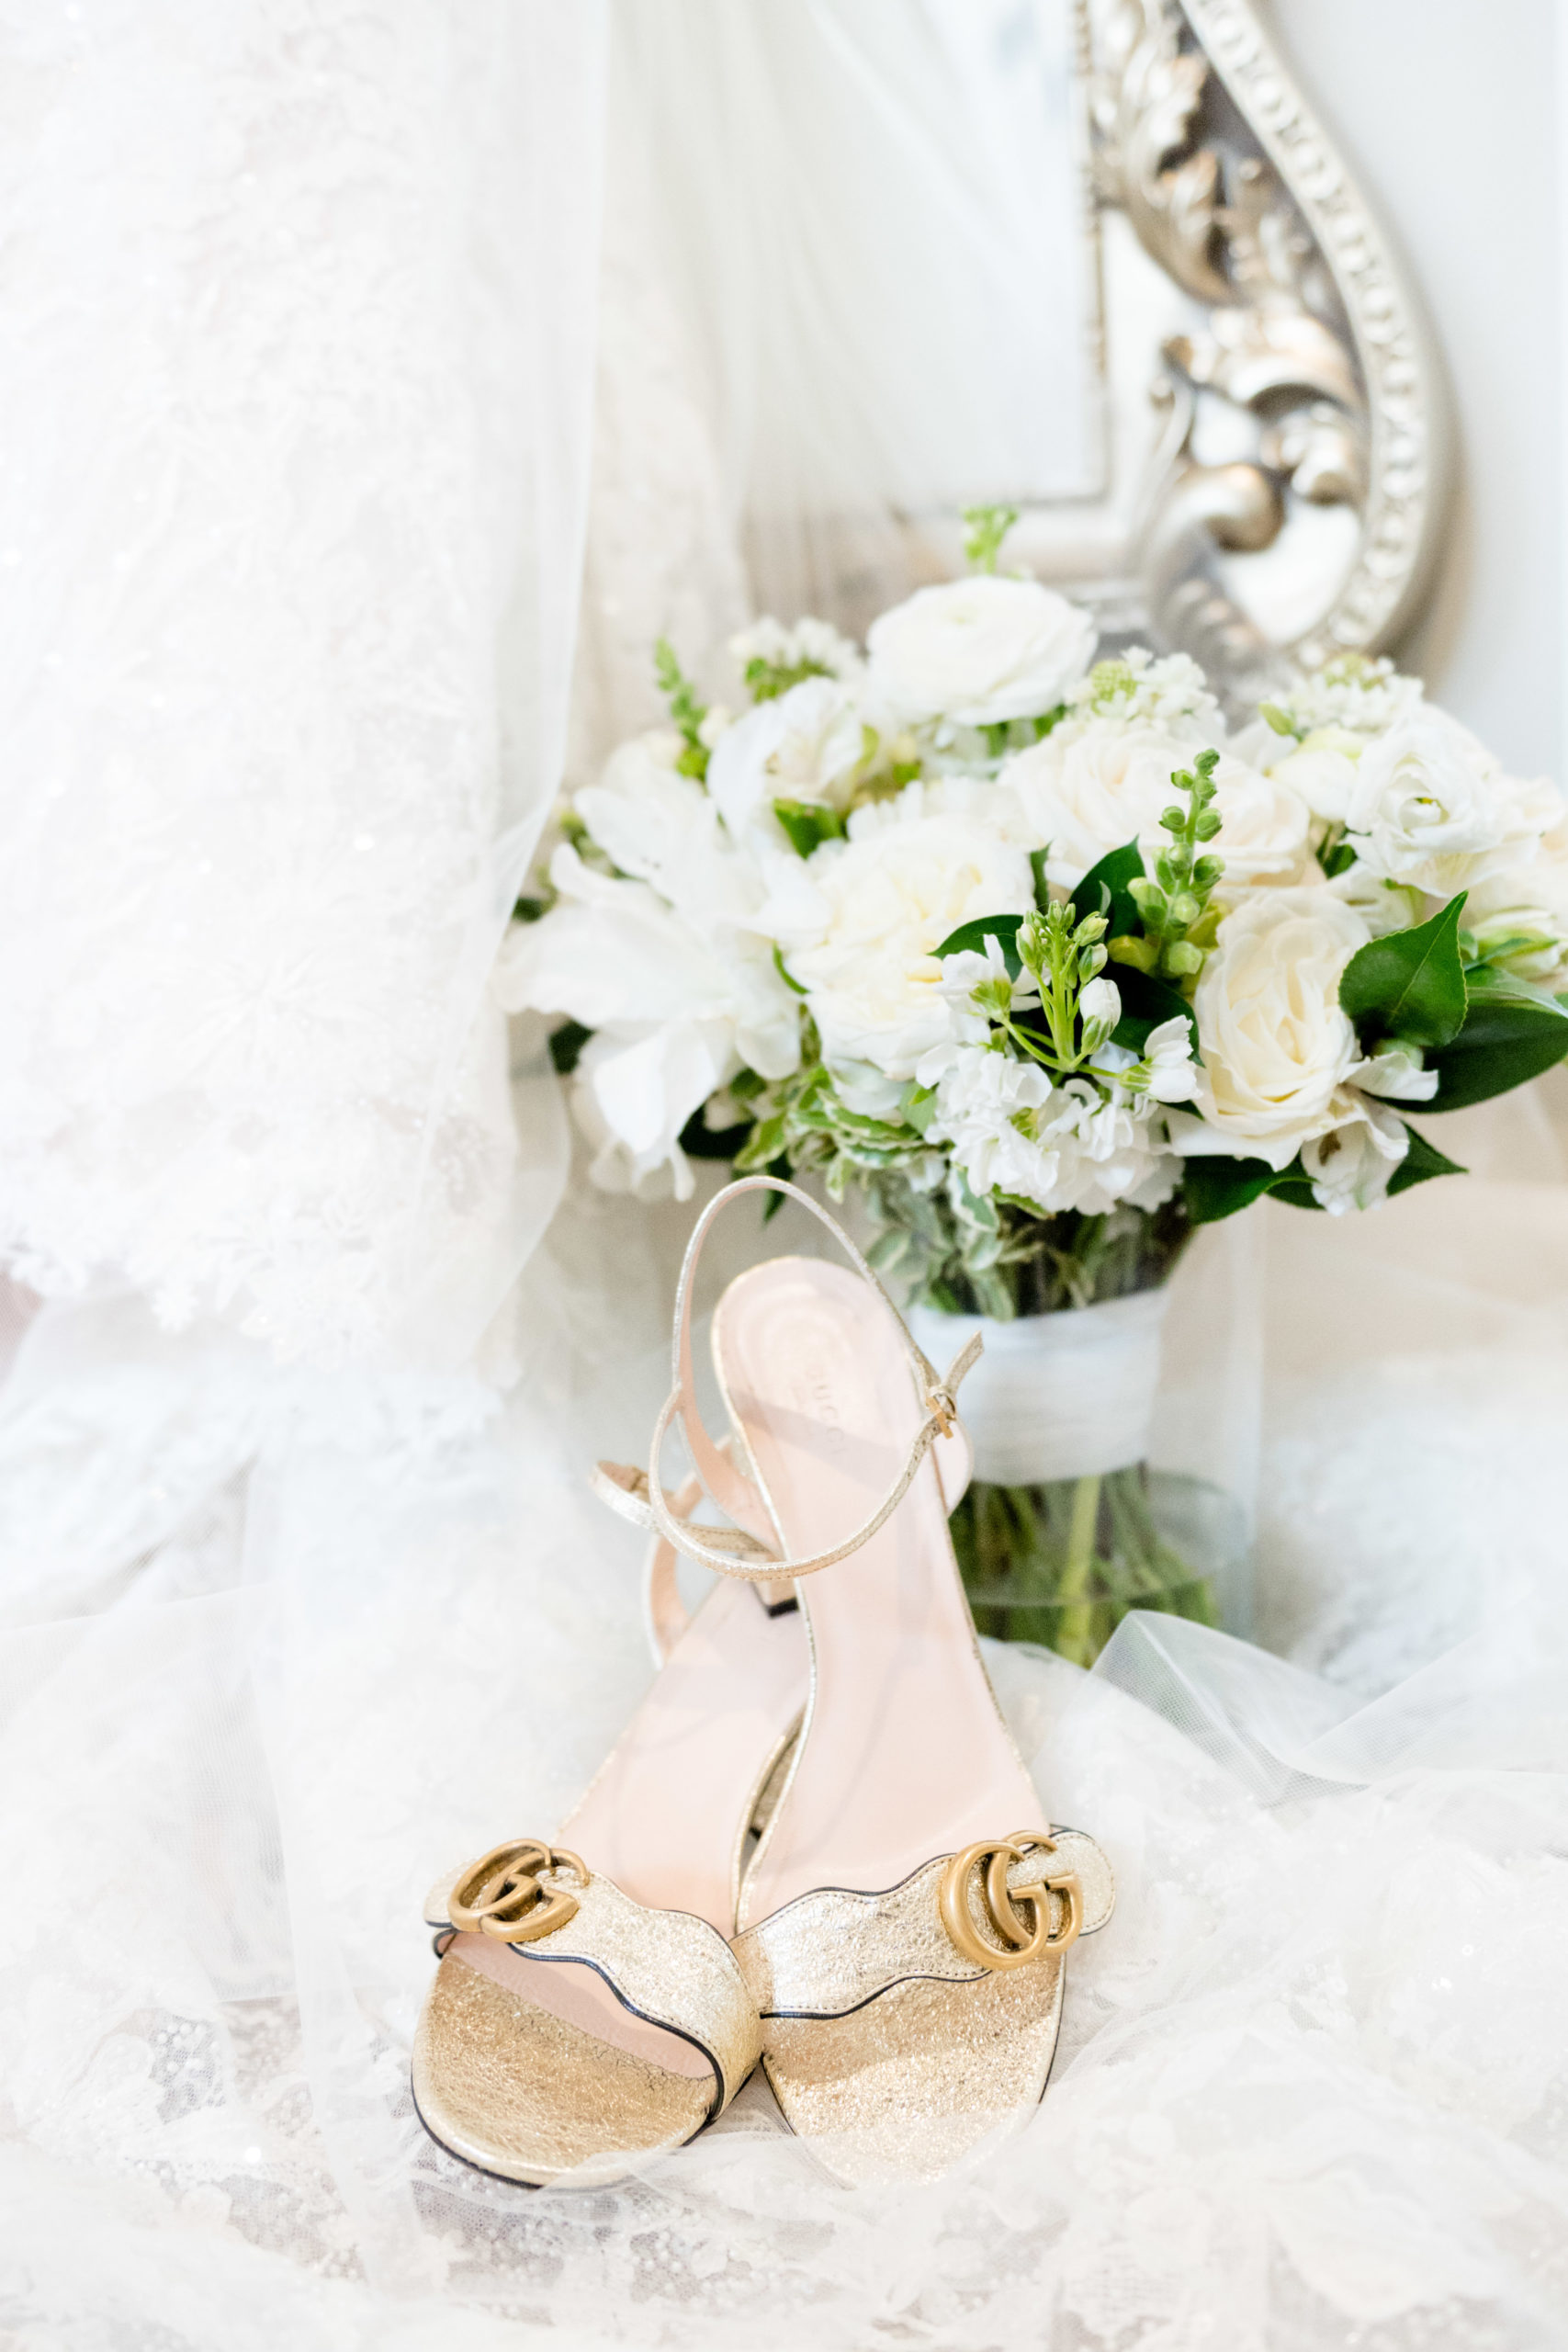 Brides shoes sit with flowers and wedding dress.